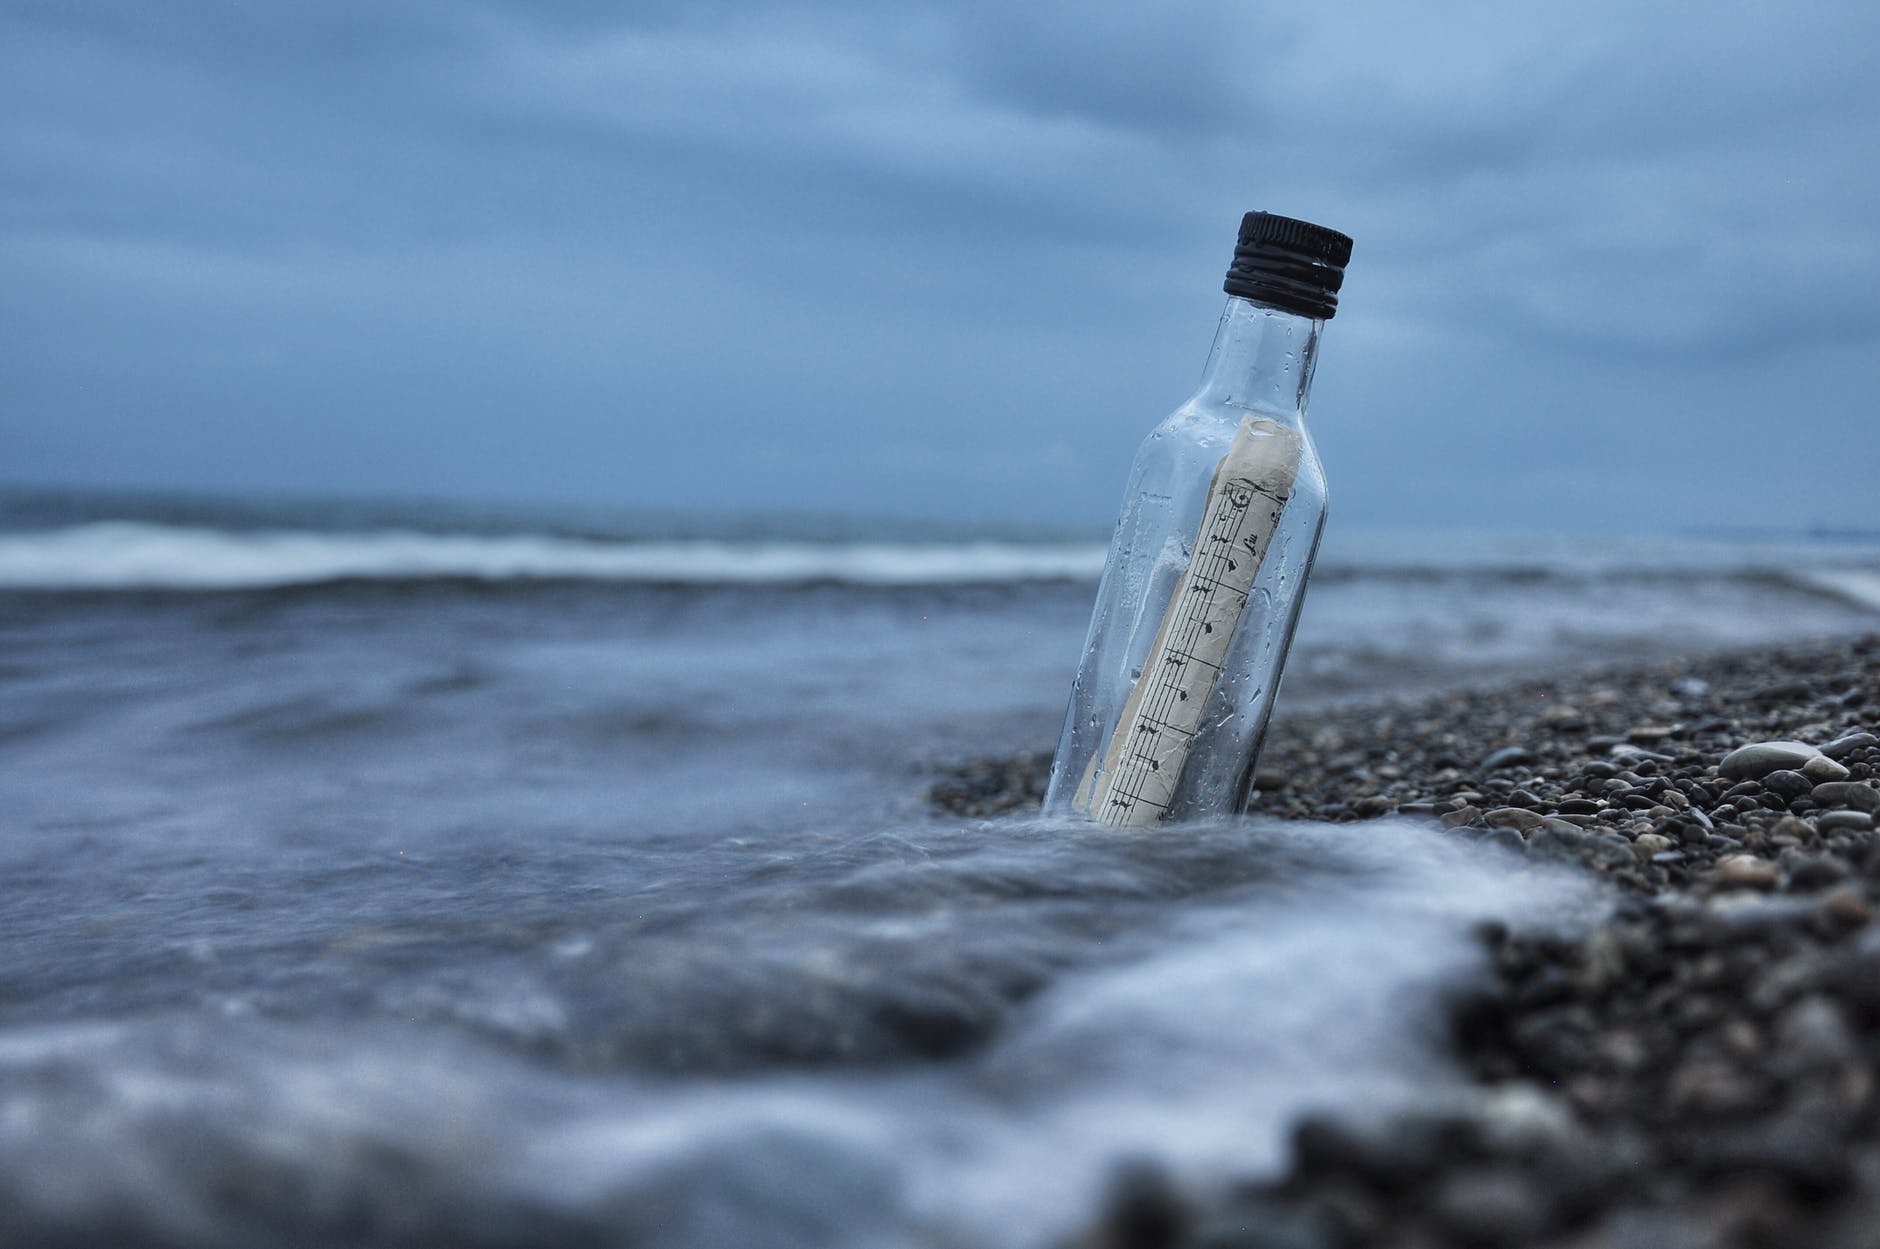 Message in a Bottle - If I was at the beach and wanted to write a message and put it in a bottle and put it out to sea, what would I want it to say and who would I like to find it? #MessageInABottle